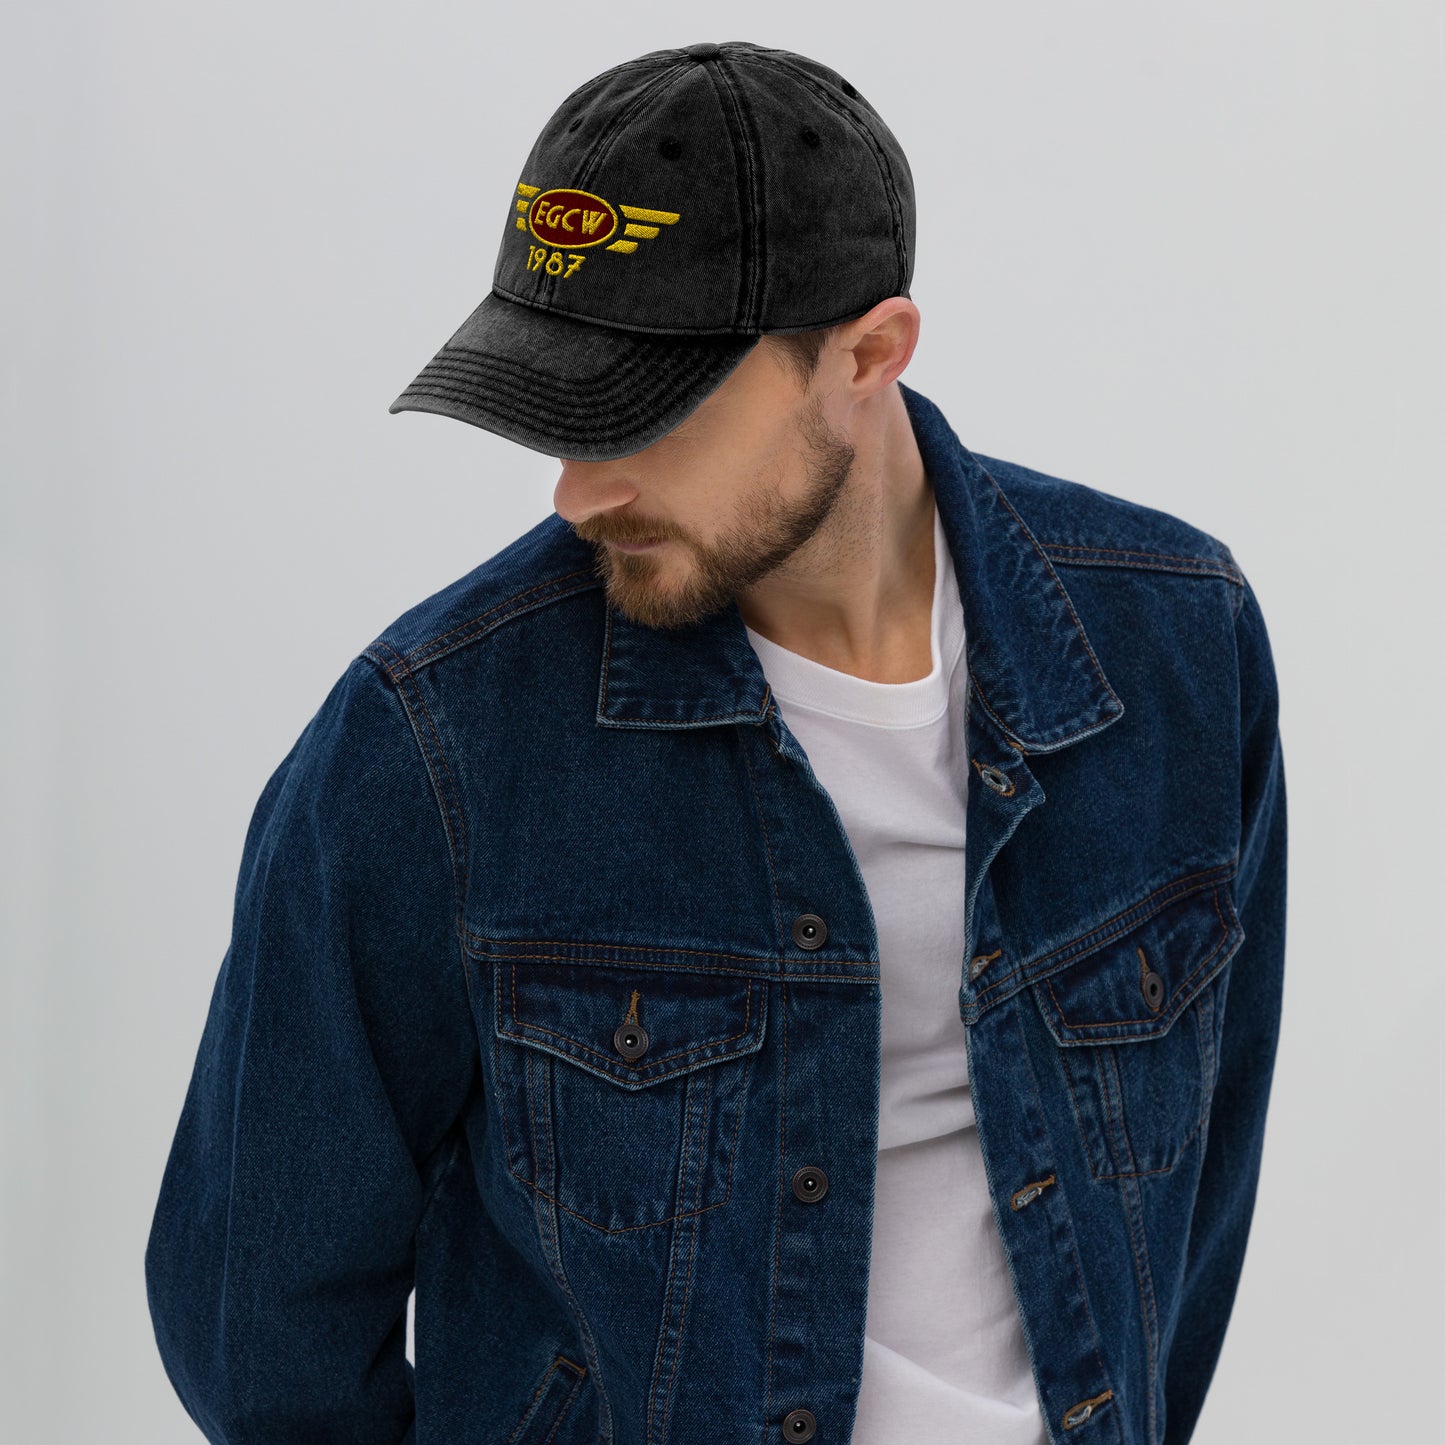 Welshpool Airport vintage cotton twill baseball cap with embroidered ICAO code.